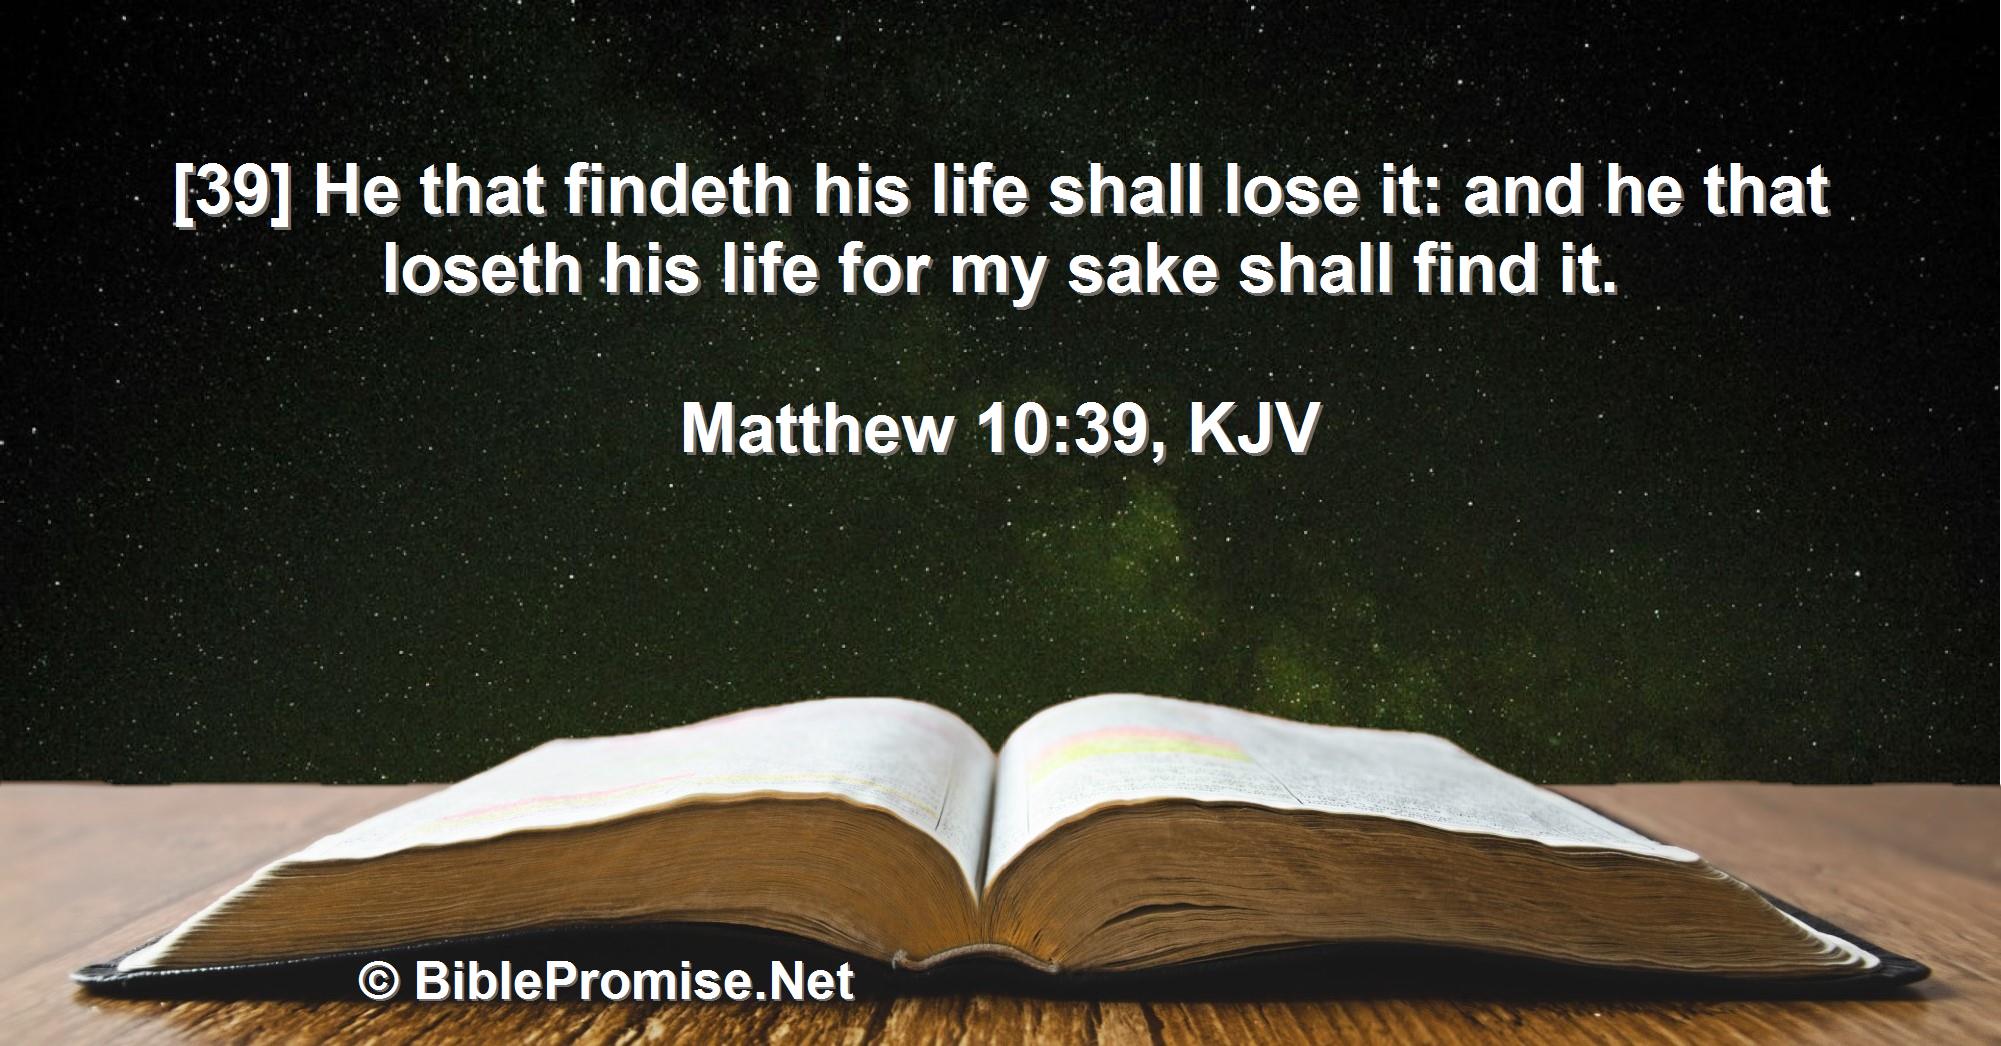 Wednesday, June 14, 2023 - Matthew 10:39 (KJV) - Bible promise that he who loses his life for God sake shall find it.